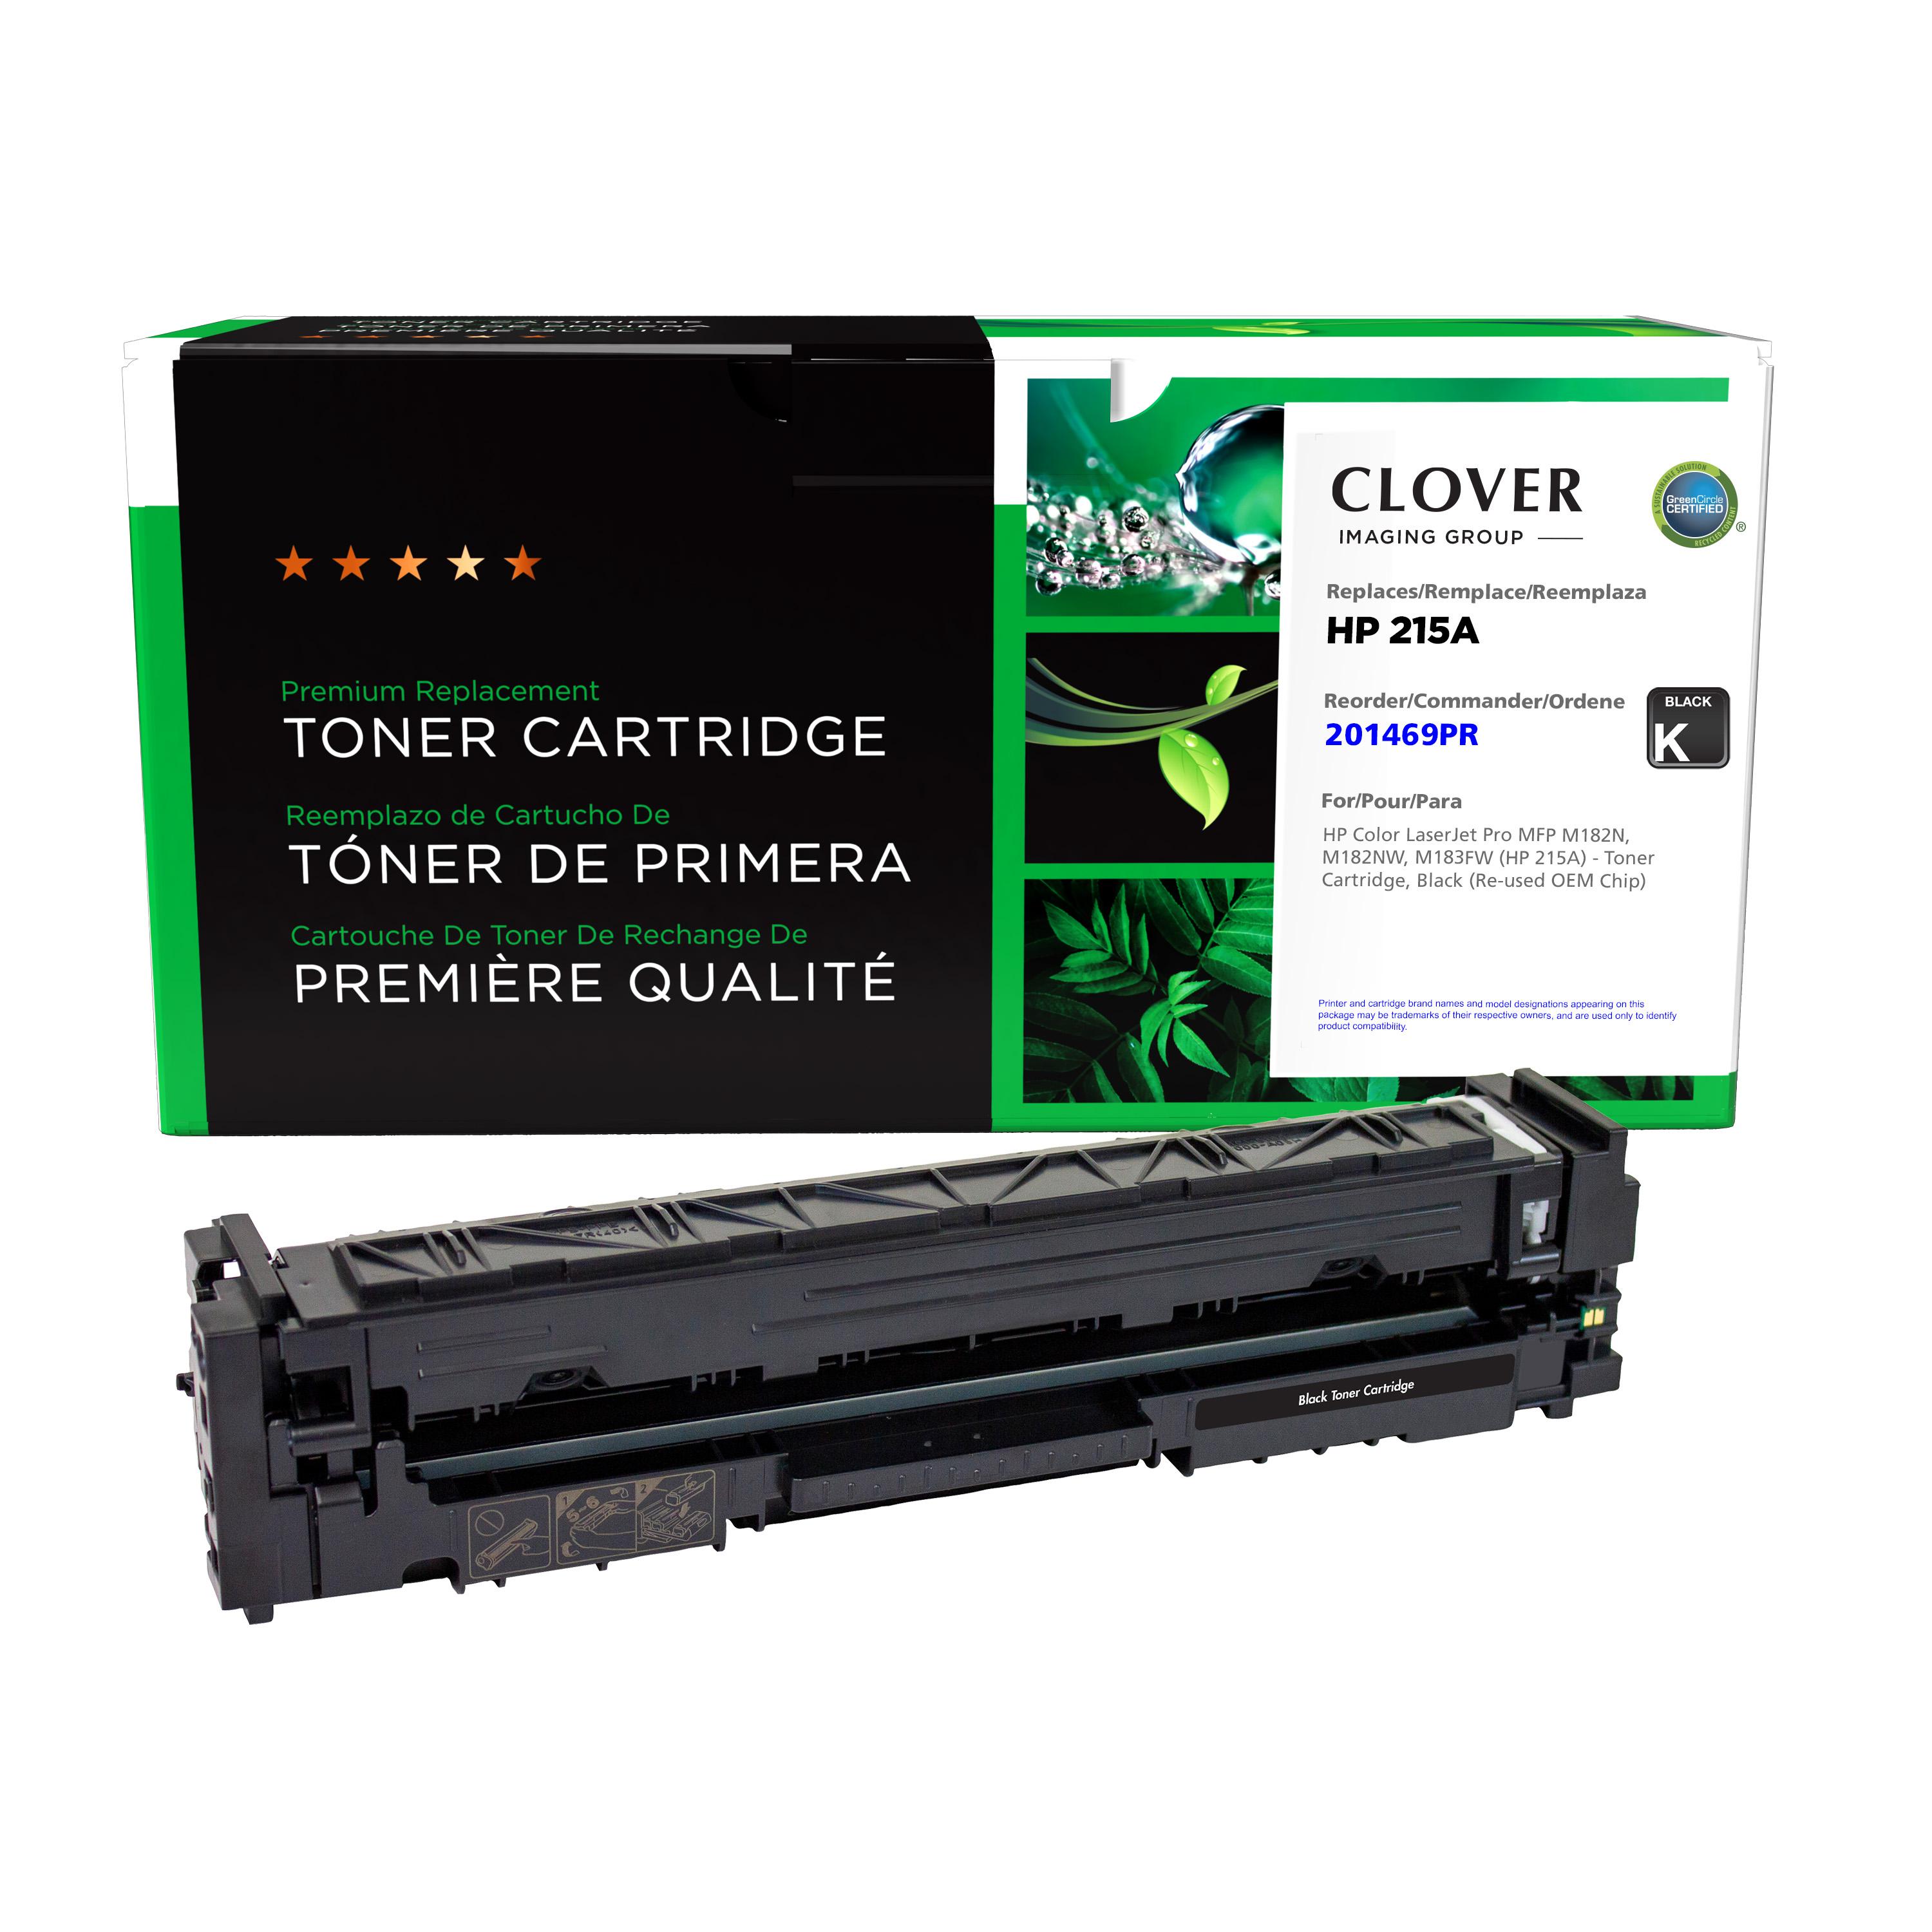 HP 215A Toner for M182nw and M183fw Series Printers